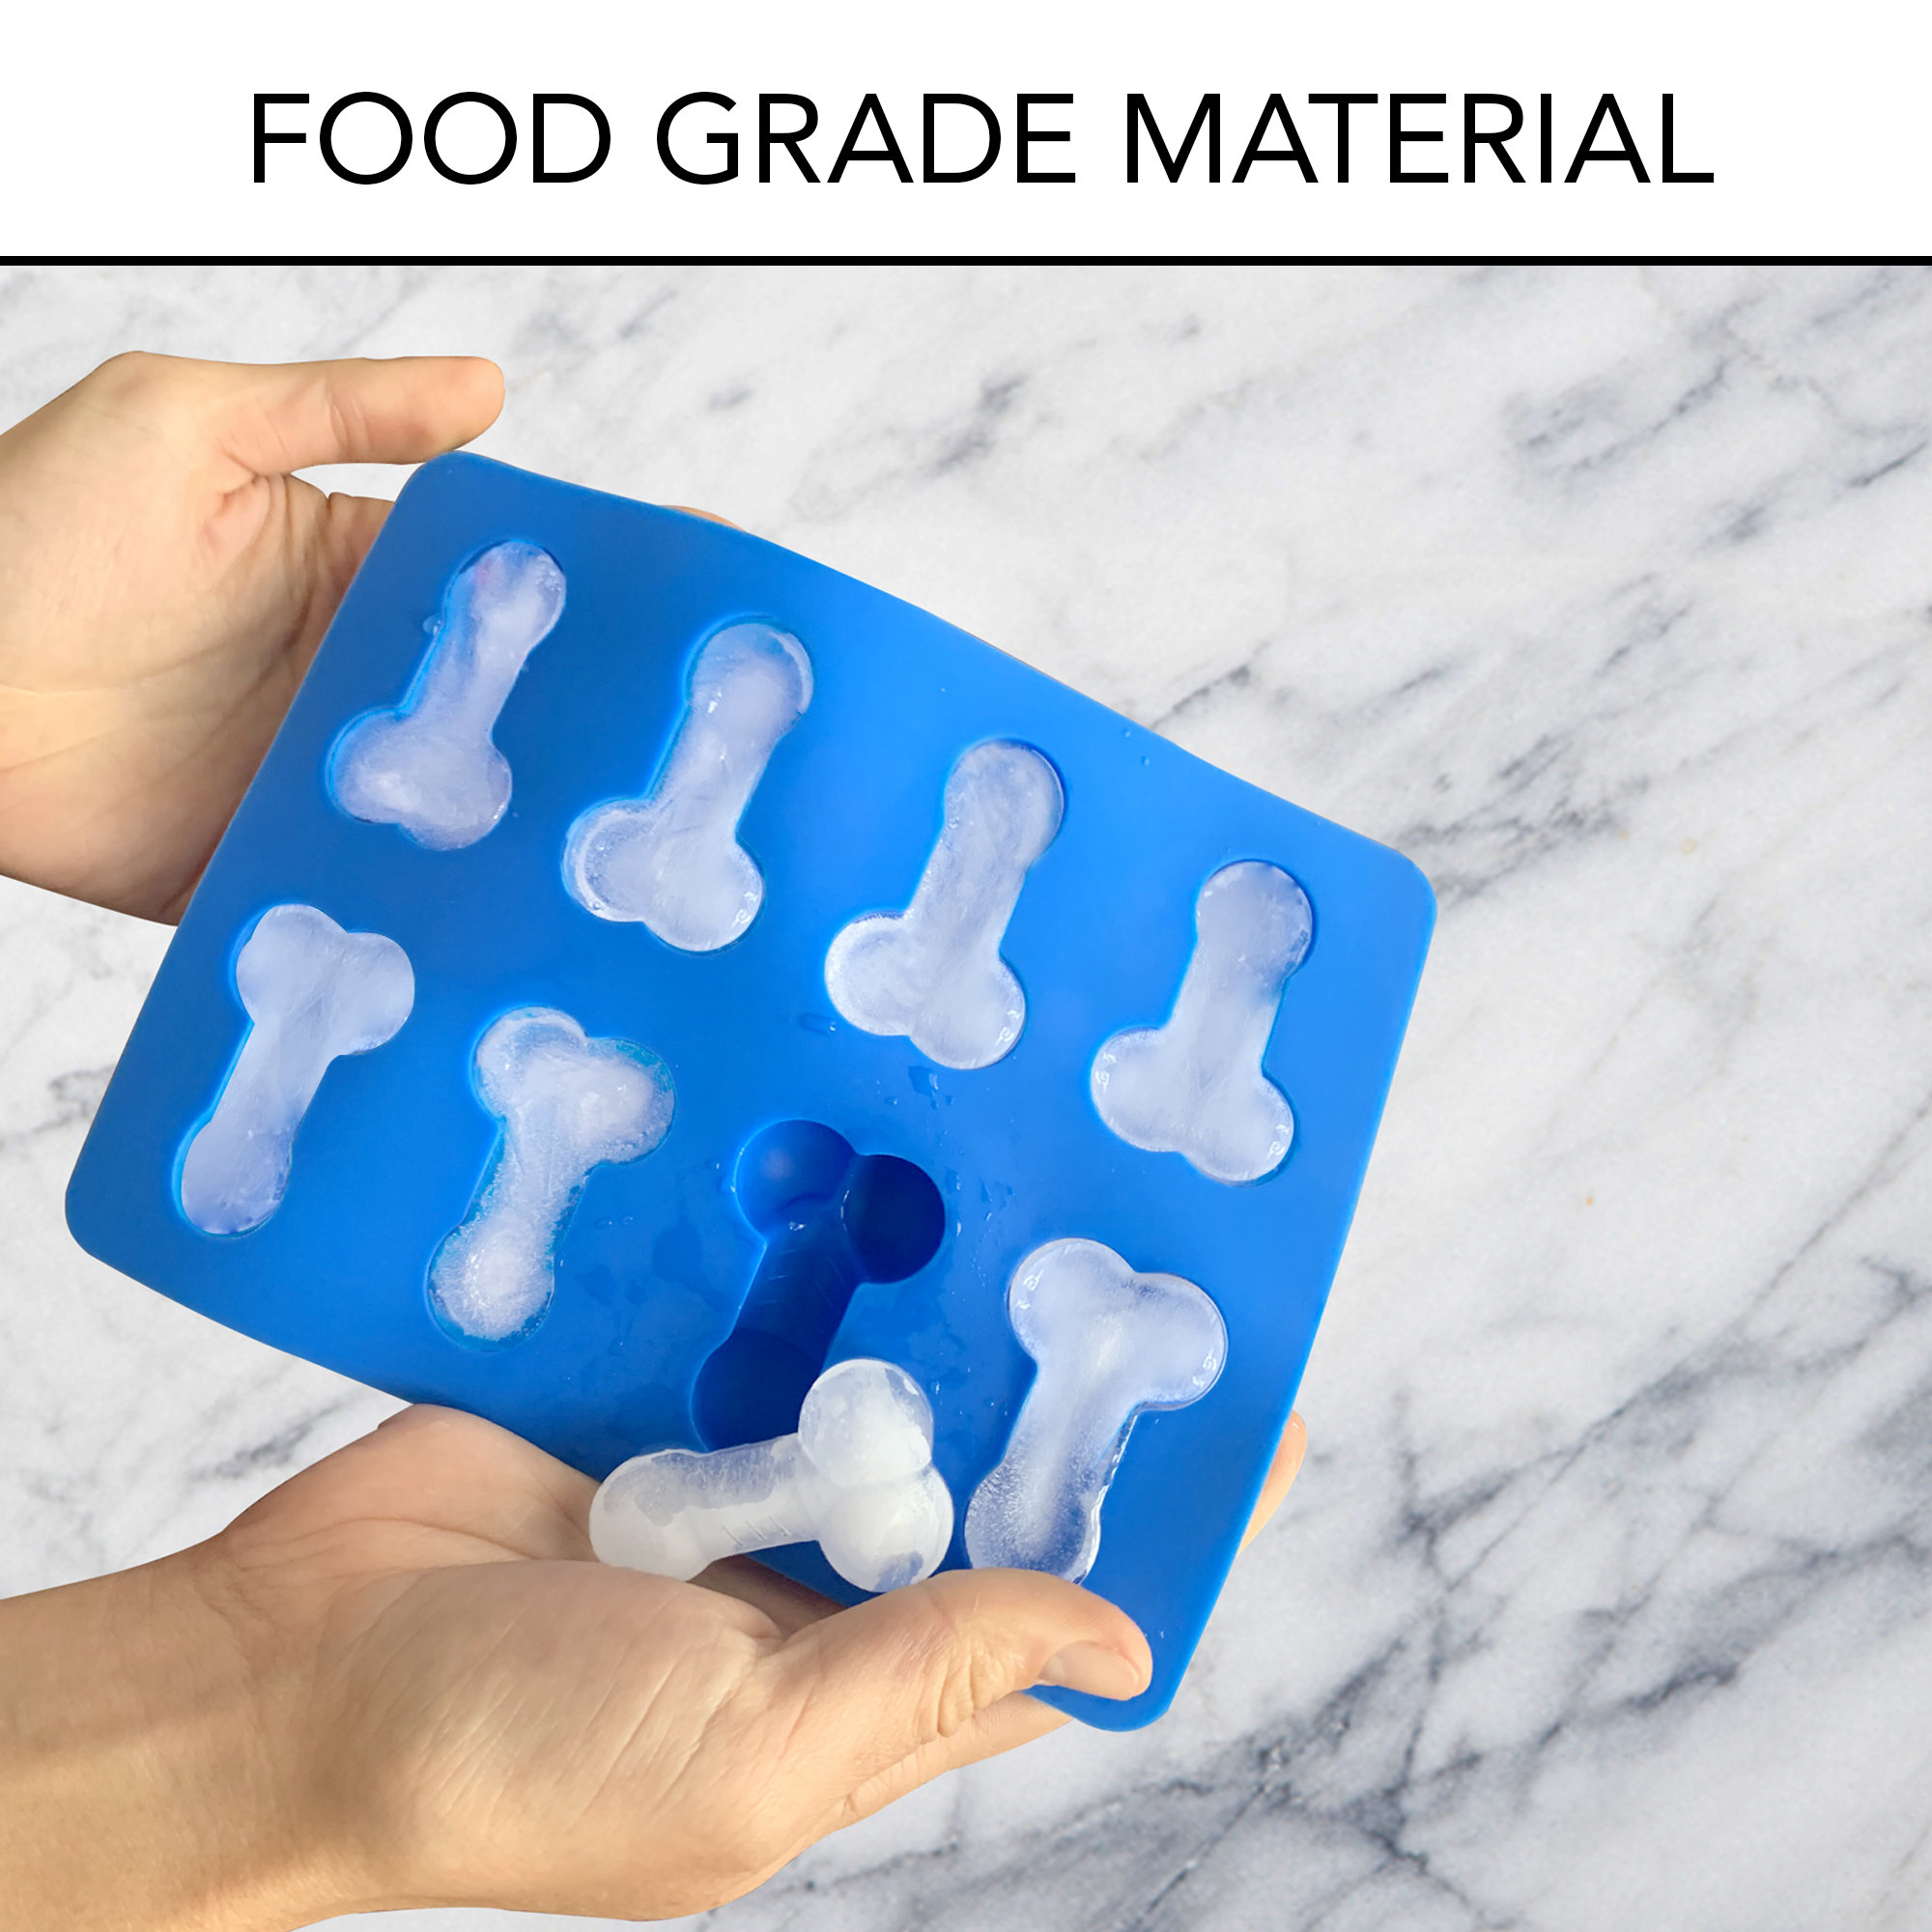 Silicone Ice Cube Mold Funny_Man Genital Shaped Ice Cube for Whiskey  Cocktail